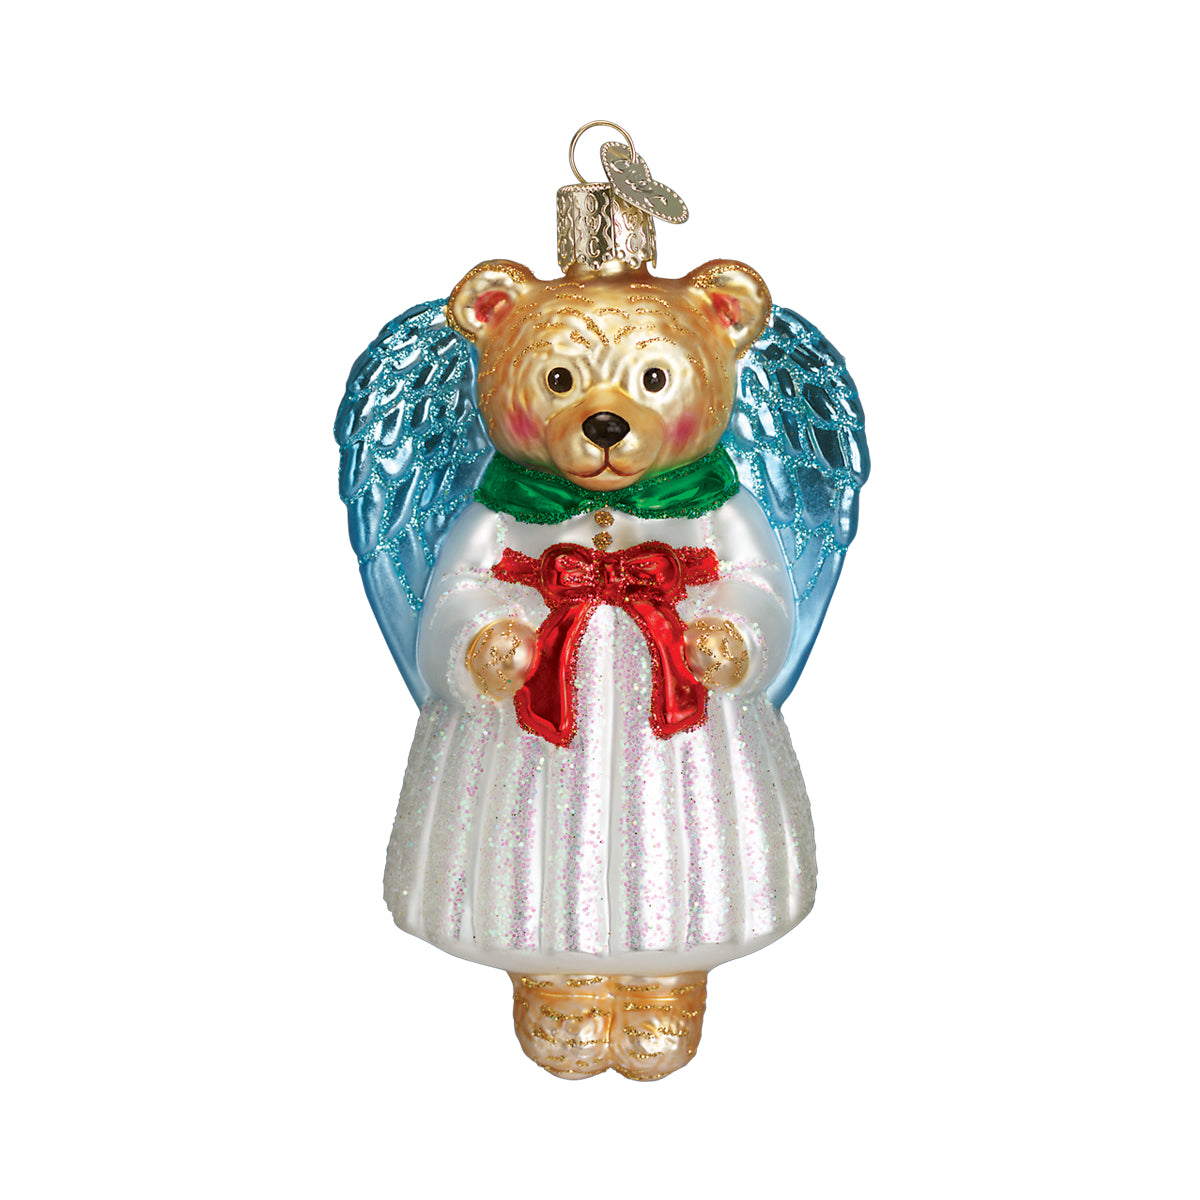 Child's First Christmas Ornaments Collection